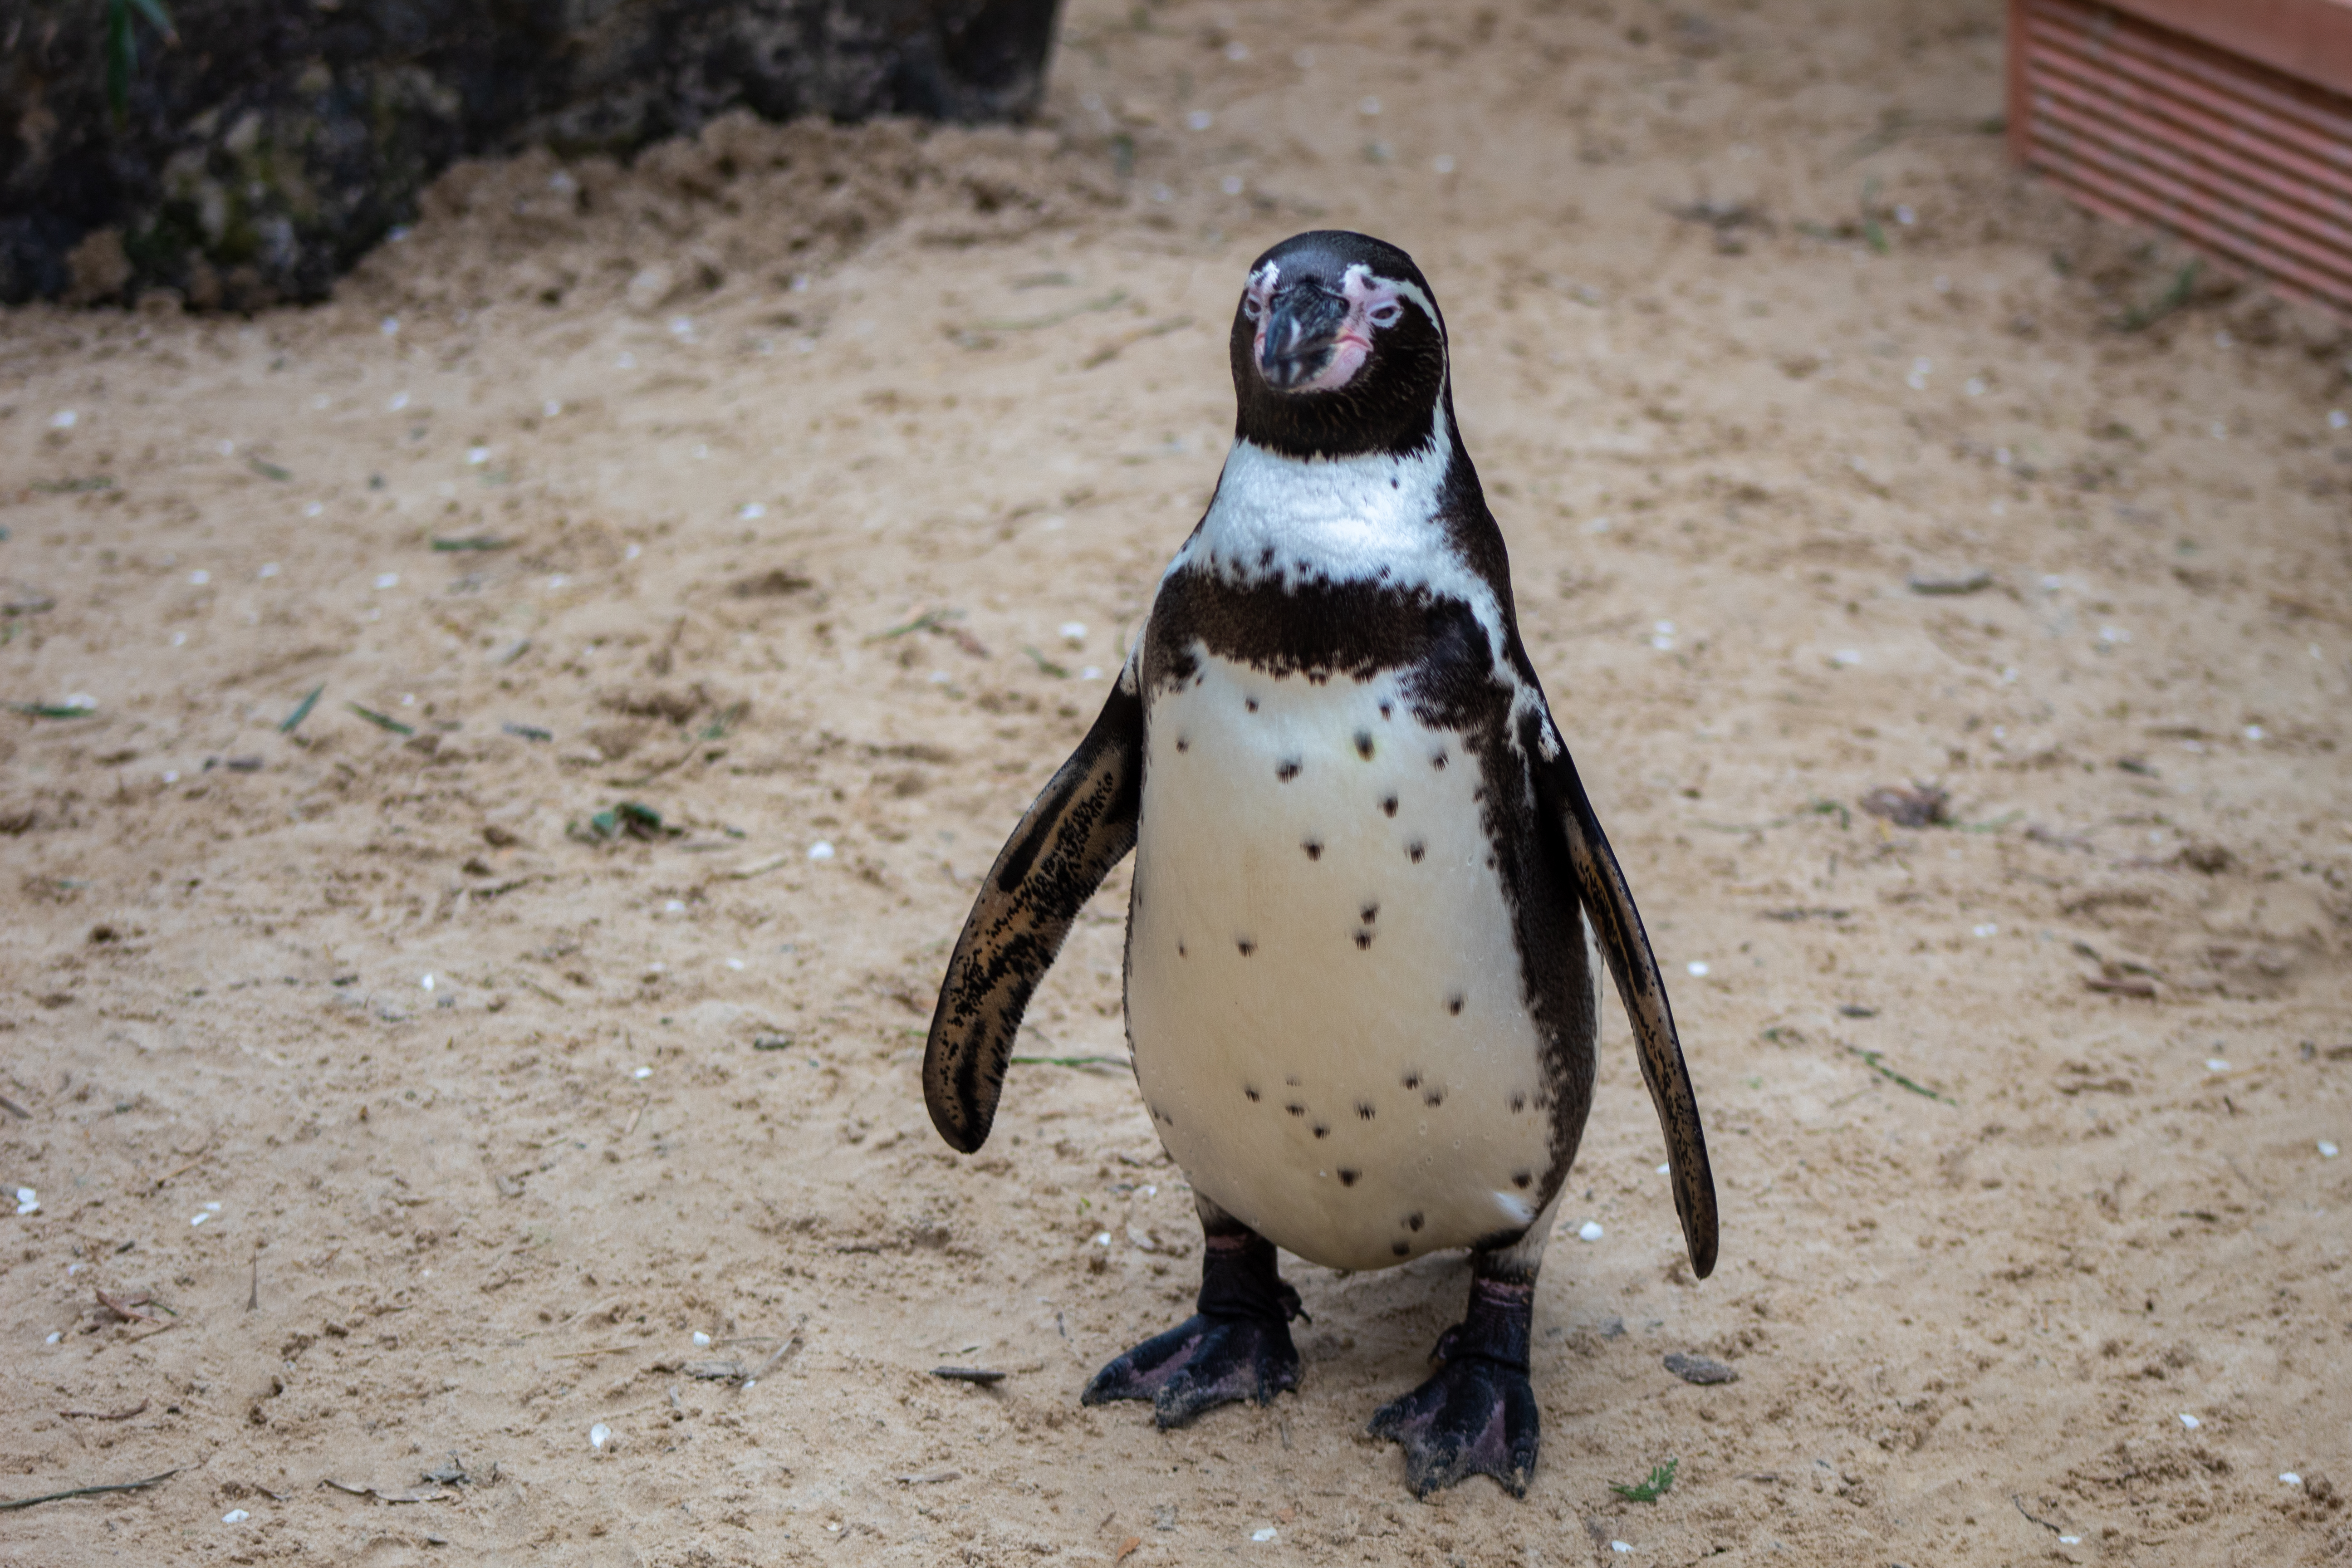 Penguin at a zoo